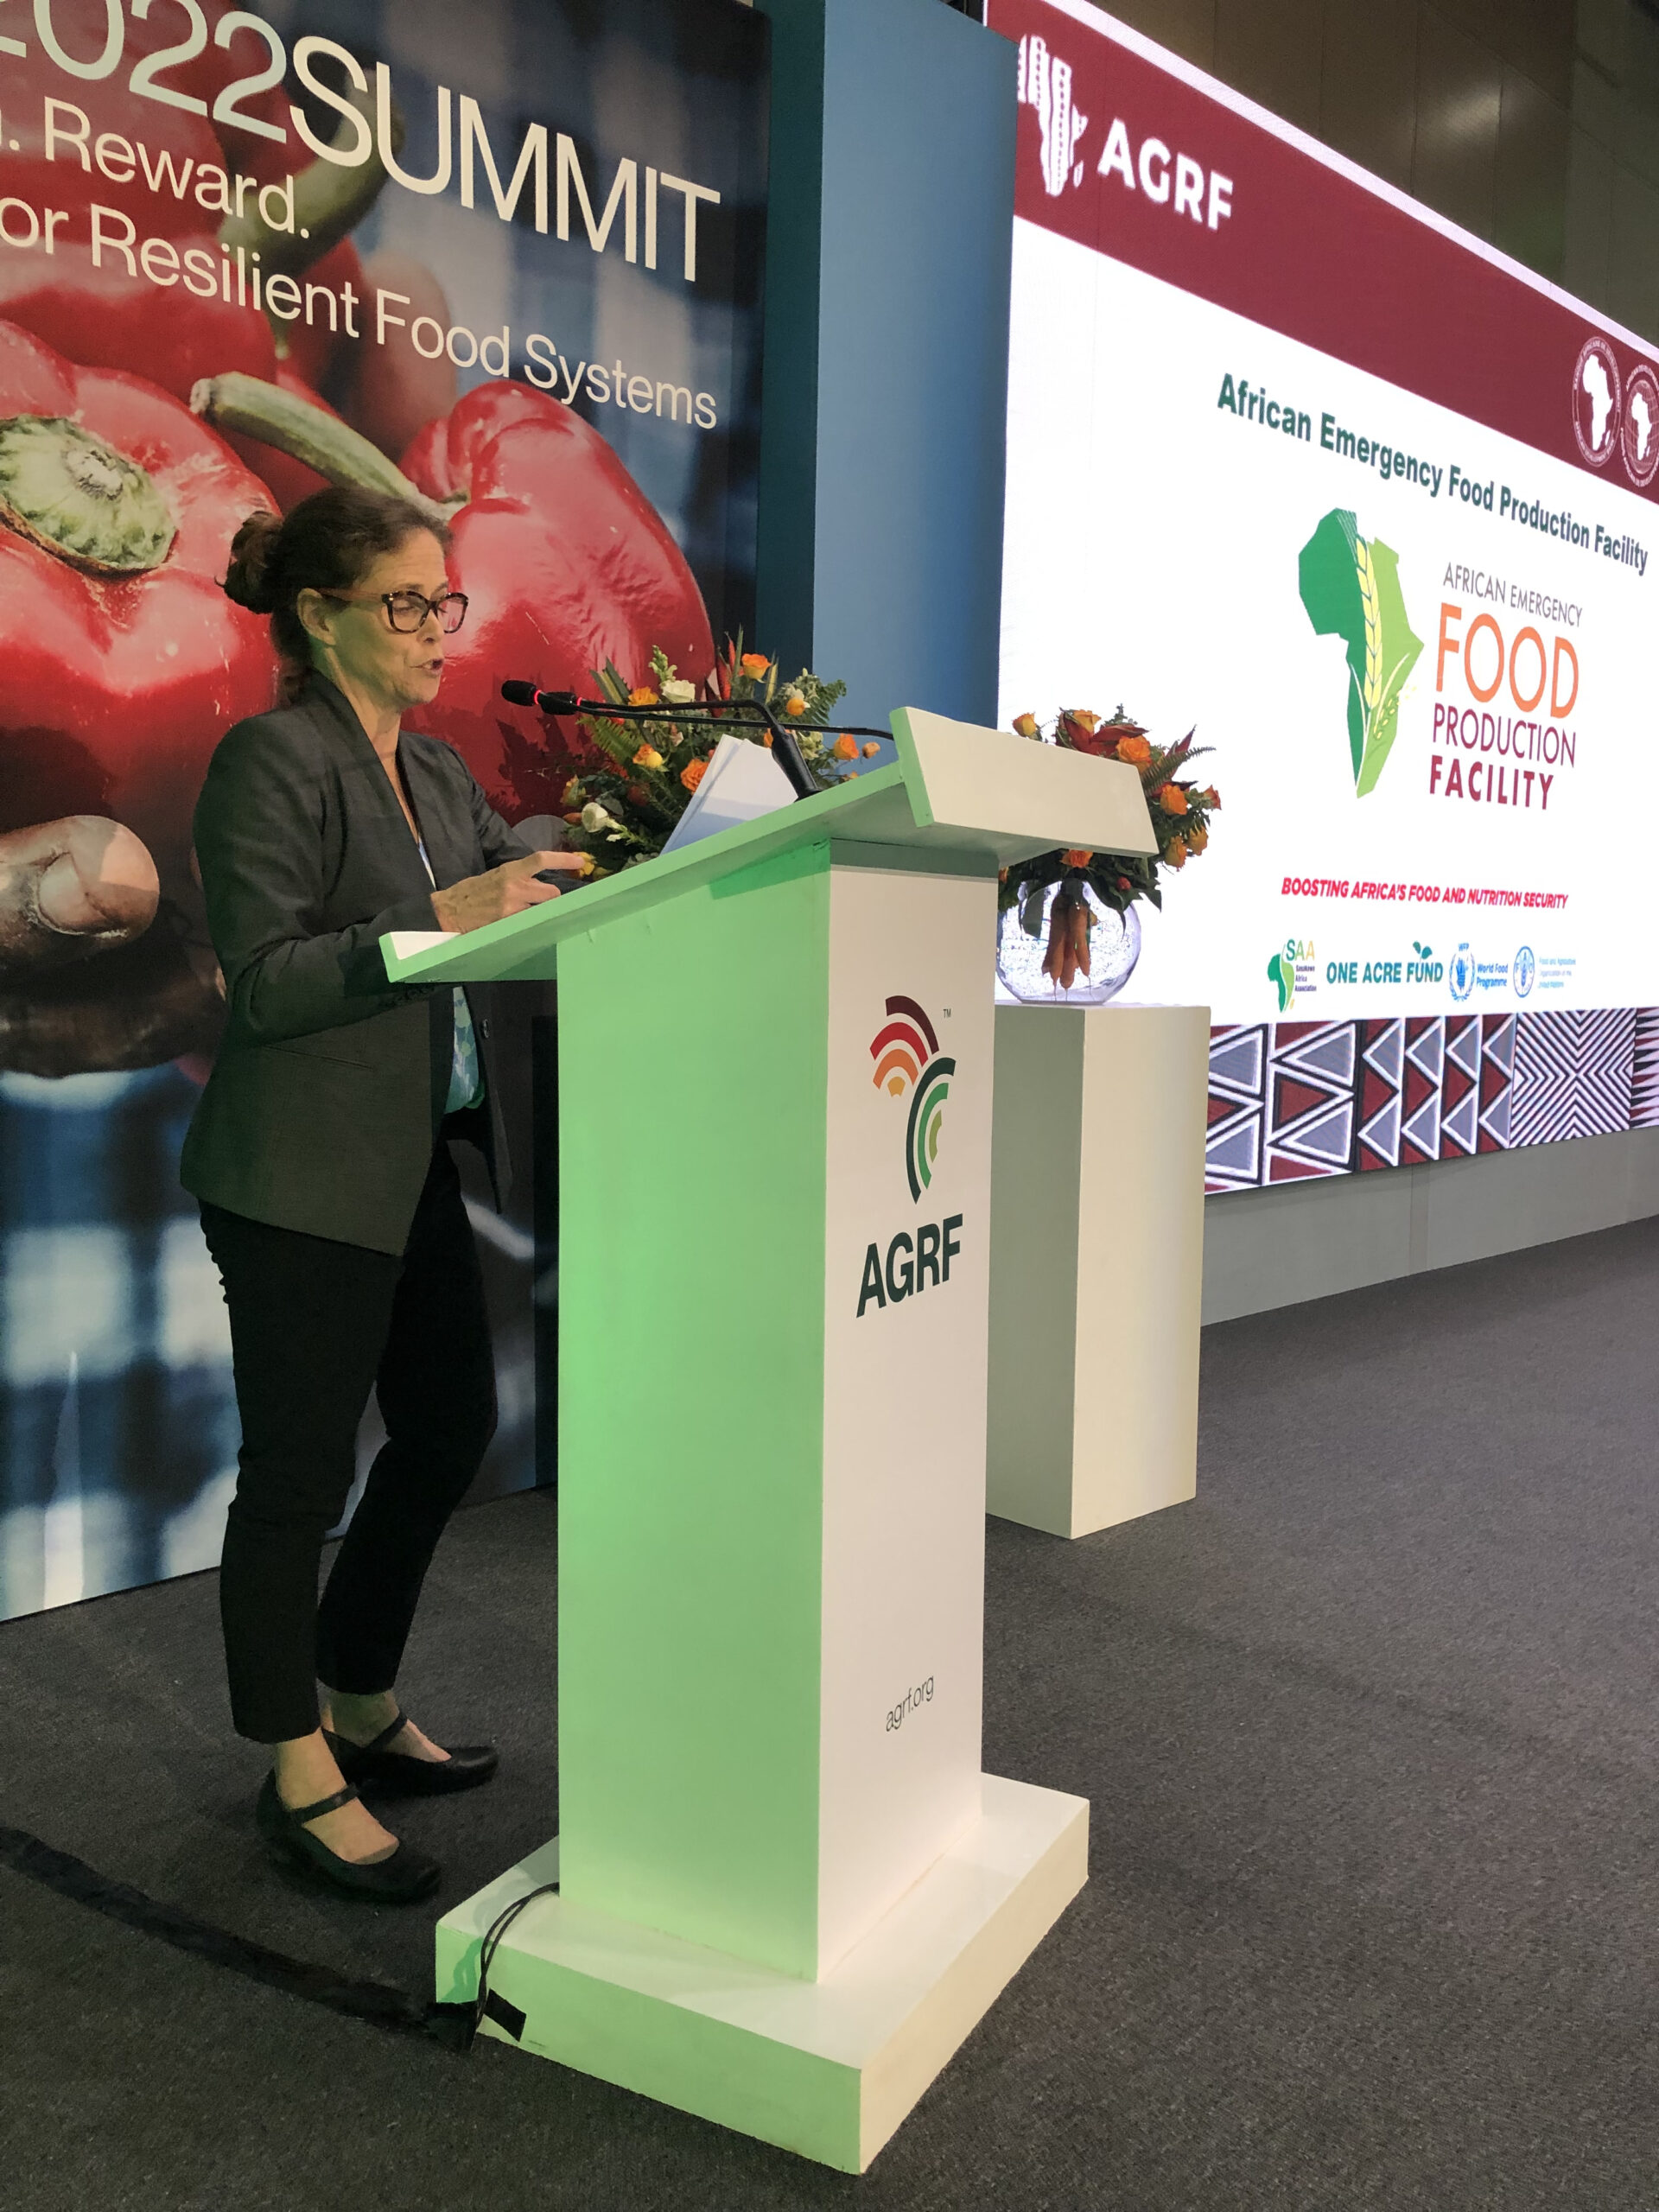 AfDB sponsors 2022 African Green Revolution Forum with $100,000